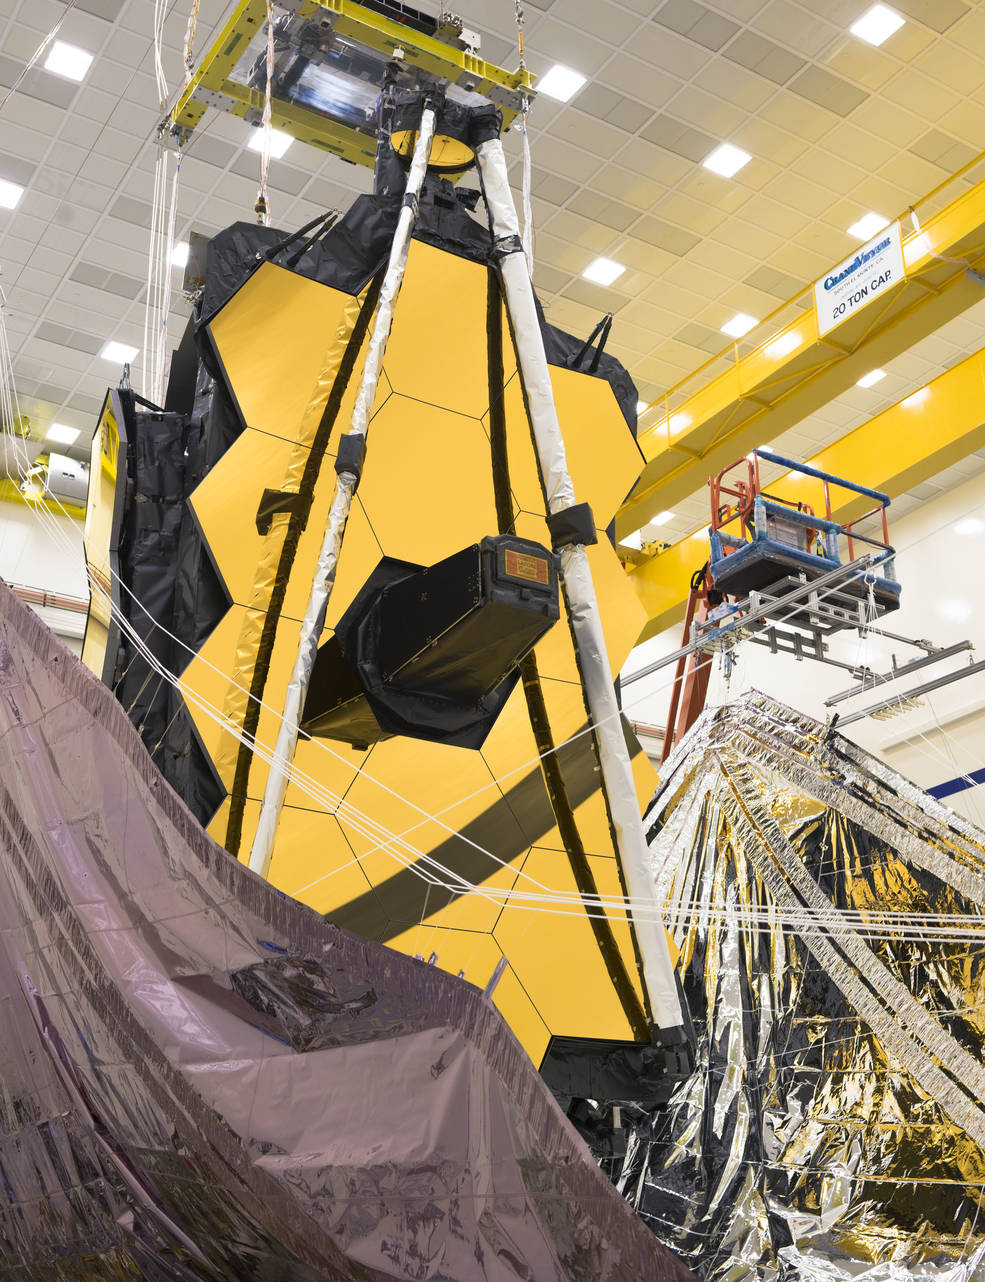 James Webb telescope, due to be launched this year. Credit: NASA / Chris Gunn